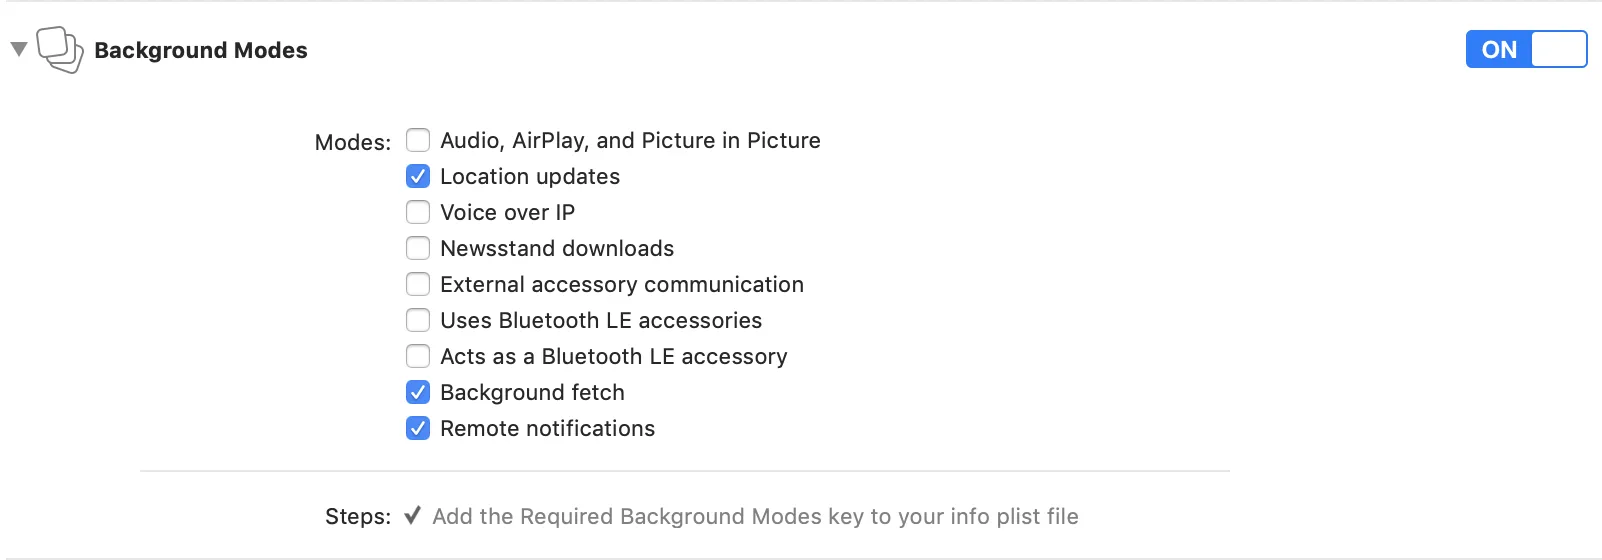 Background Modes Options